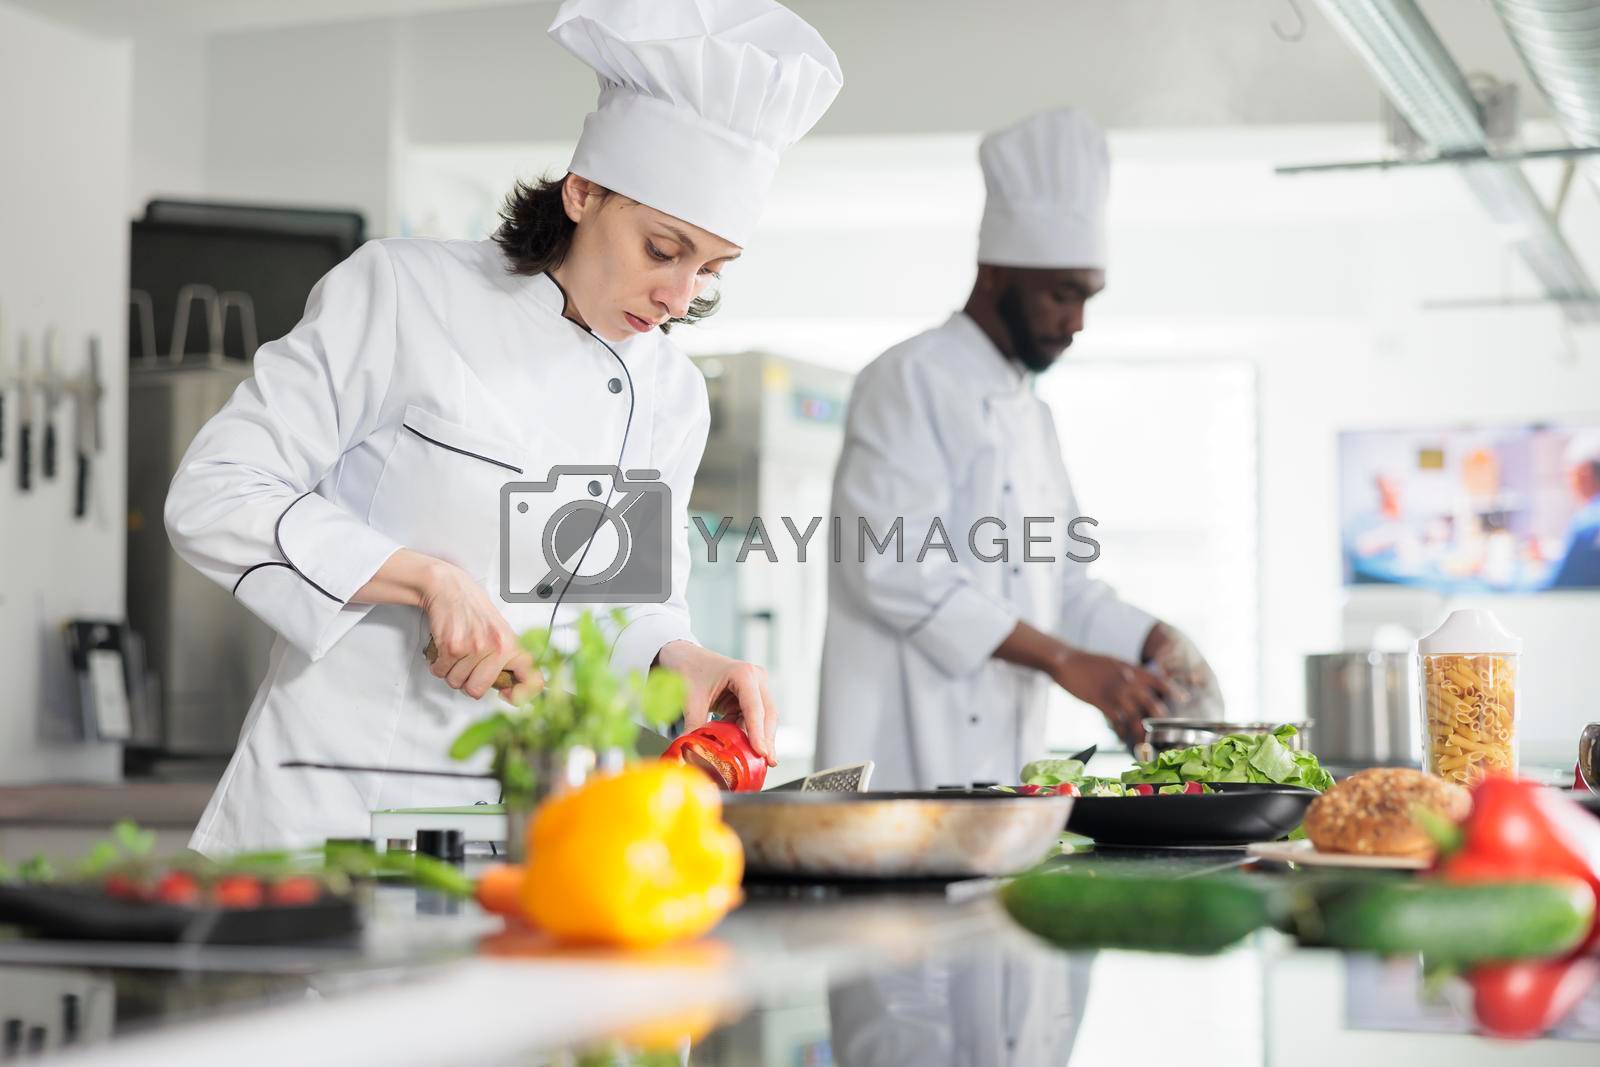 Head cook in professional kitchen cooking organic food while cutting fresh vegetables. Sous chef chopping red pepper vegetable for gourmet dish served at dinner in restaurant